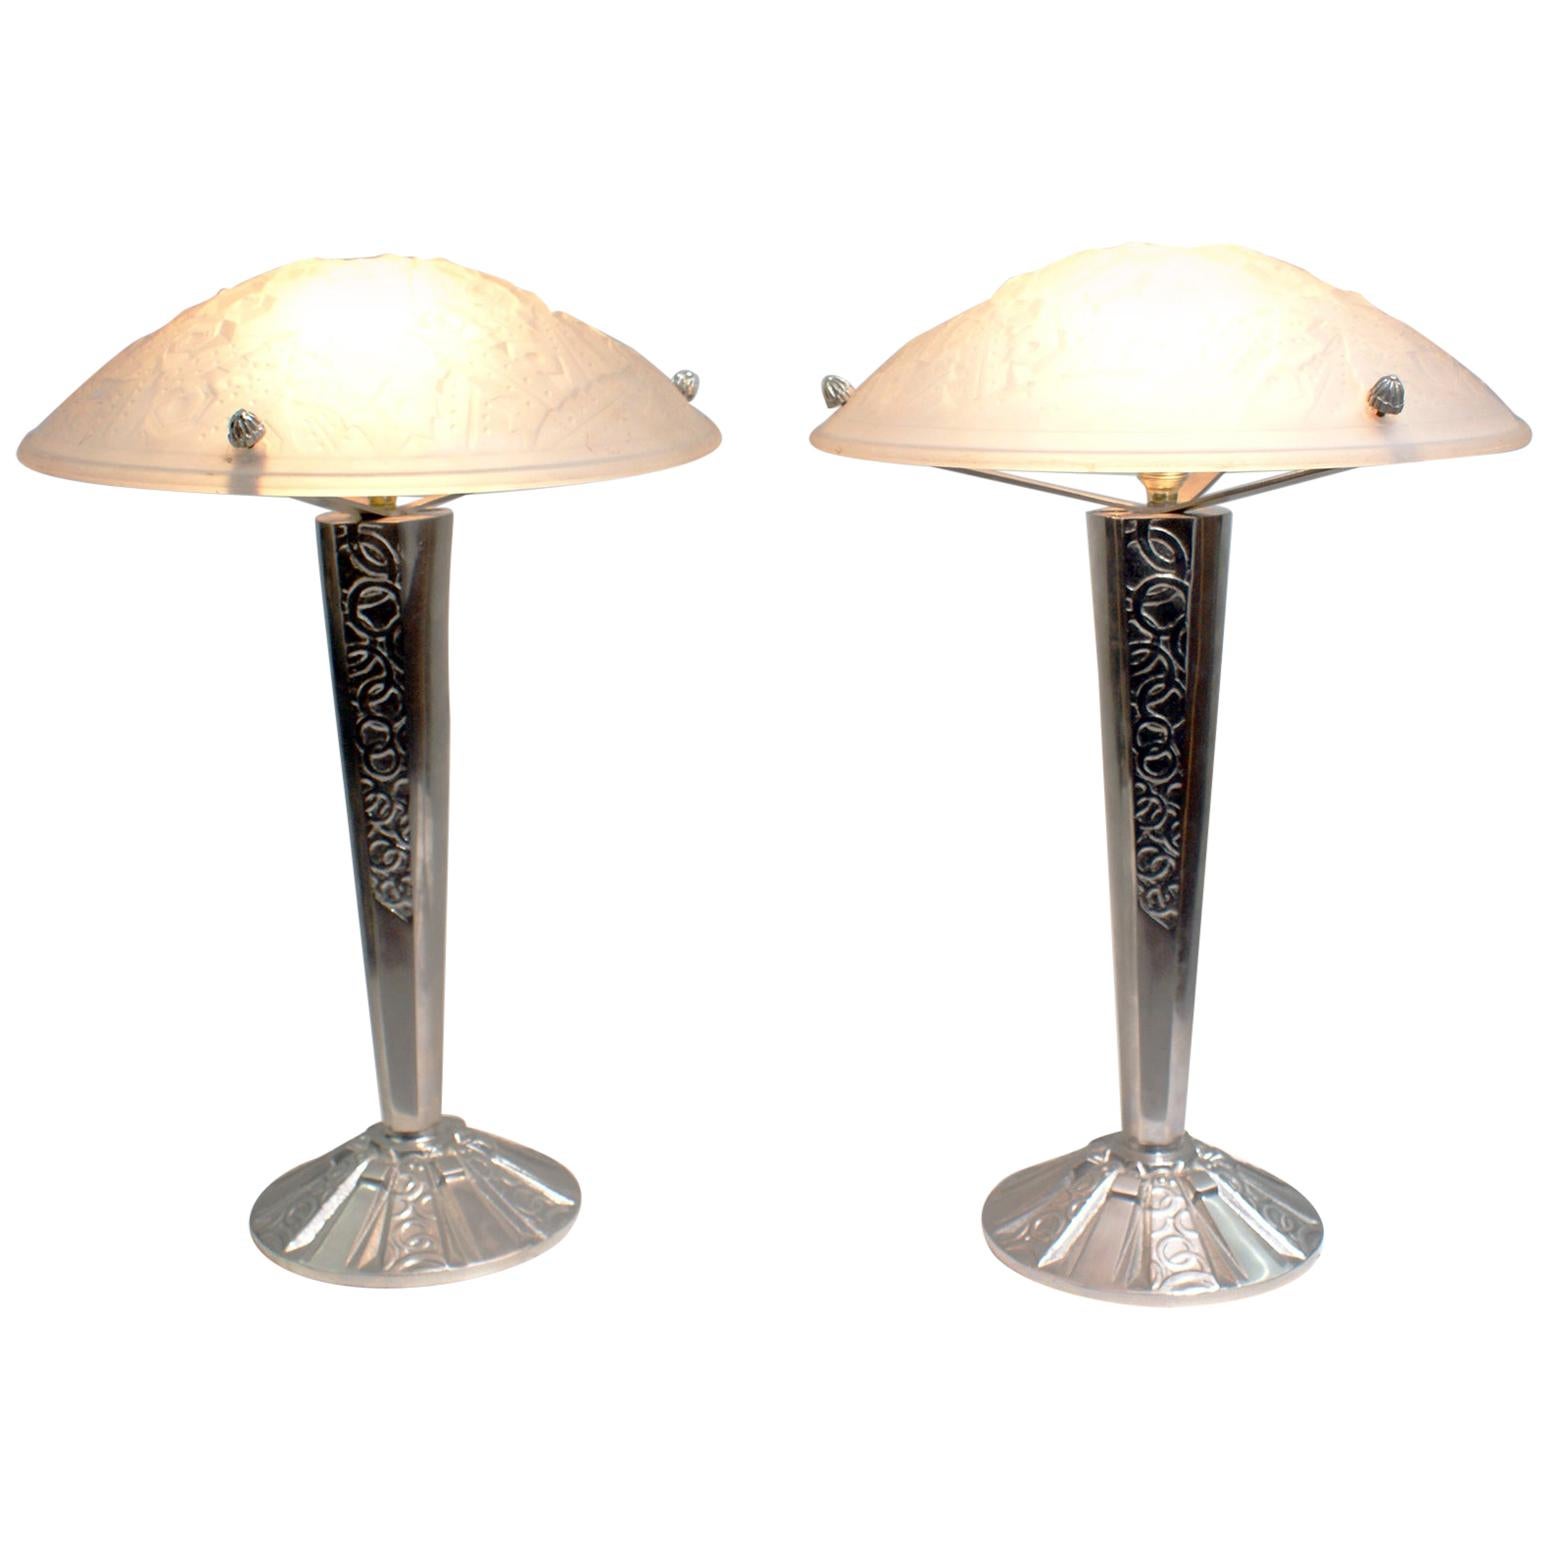 Pair of French Art Deco Table Lamp Signed “Muller Frères Luneville” For Sale